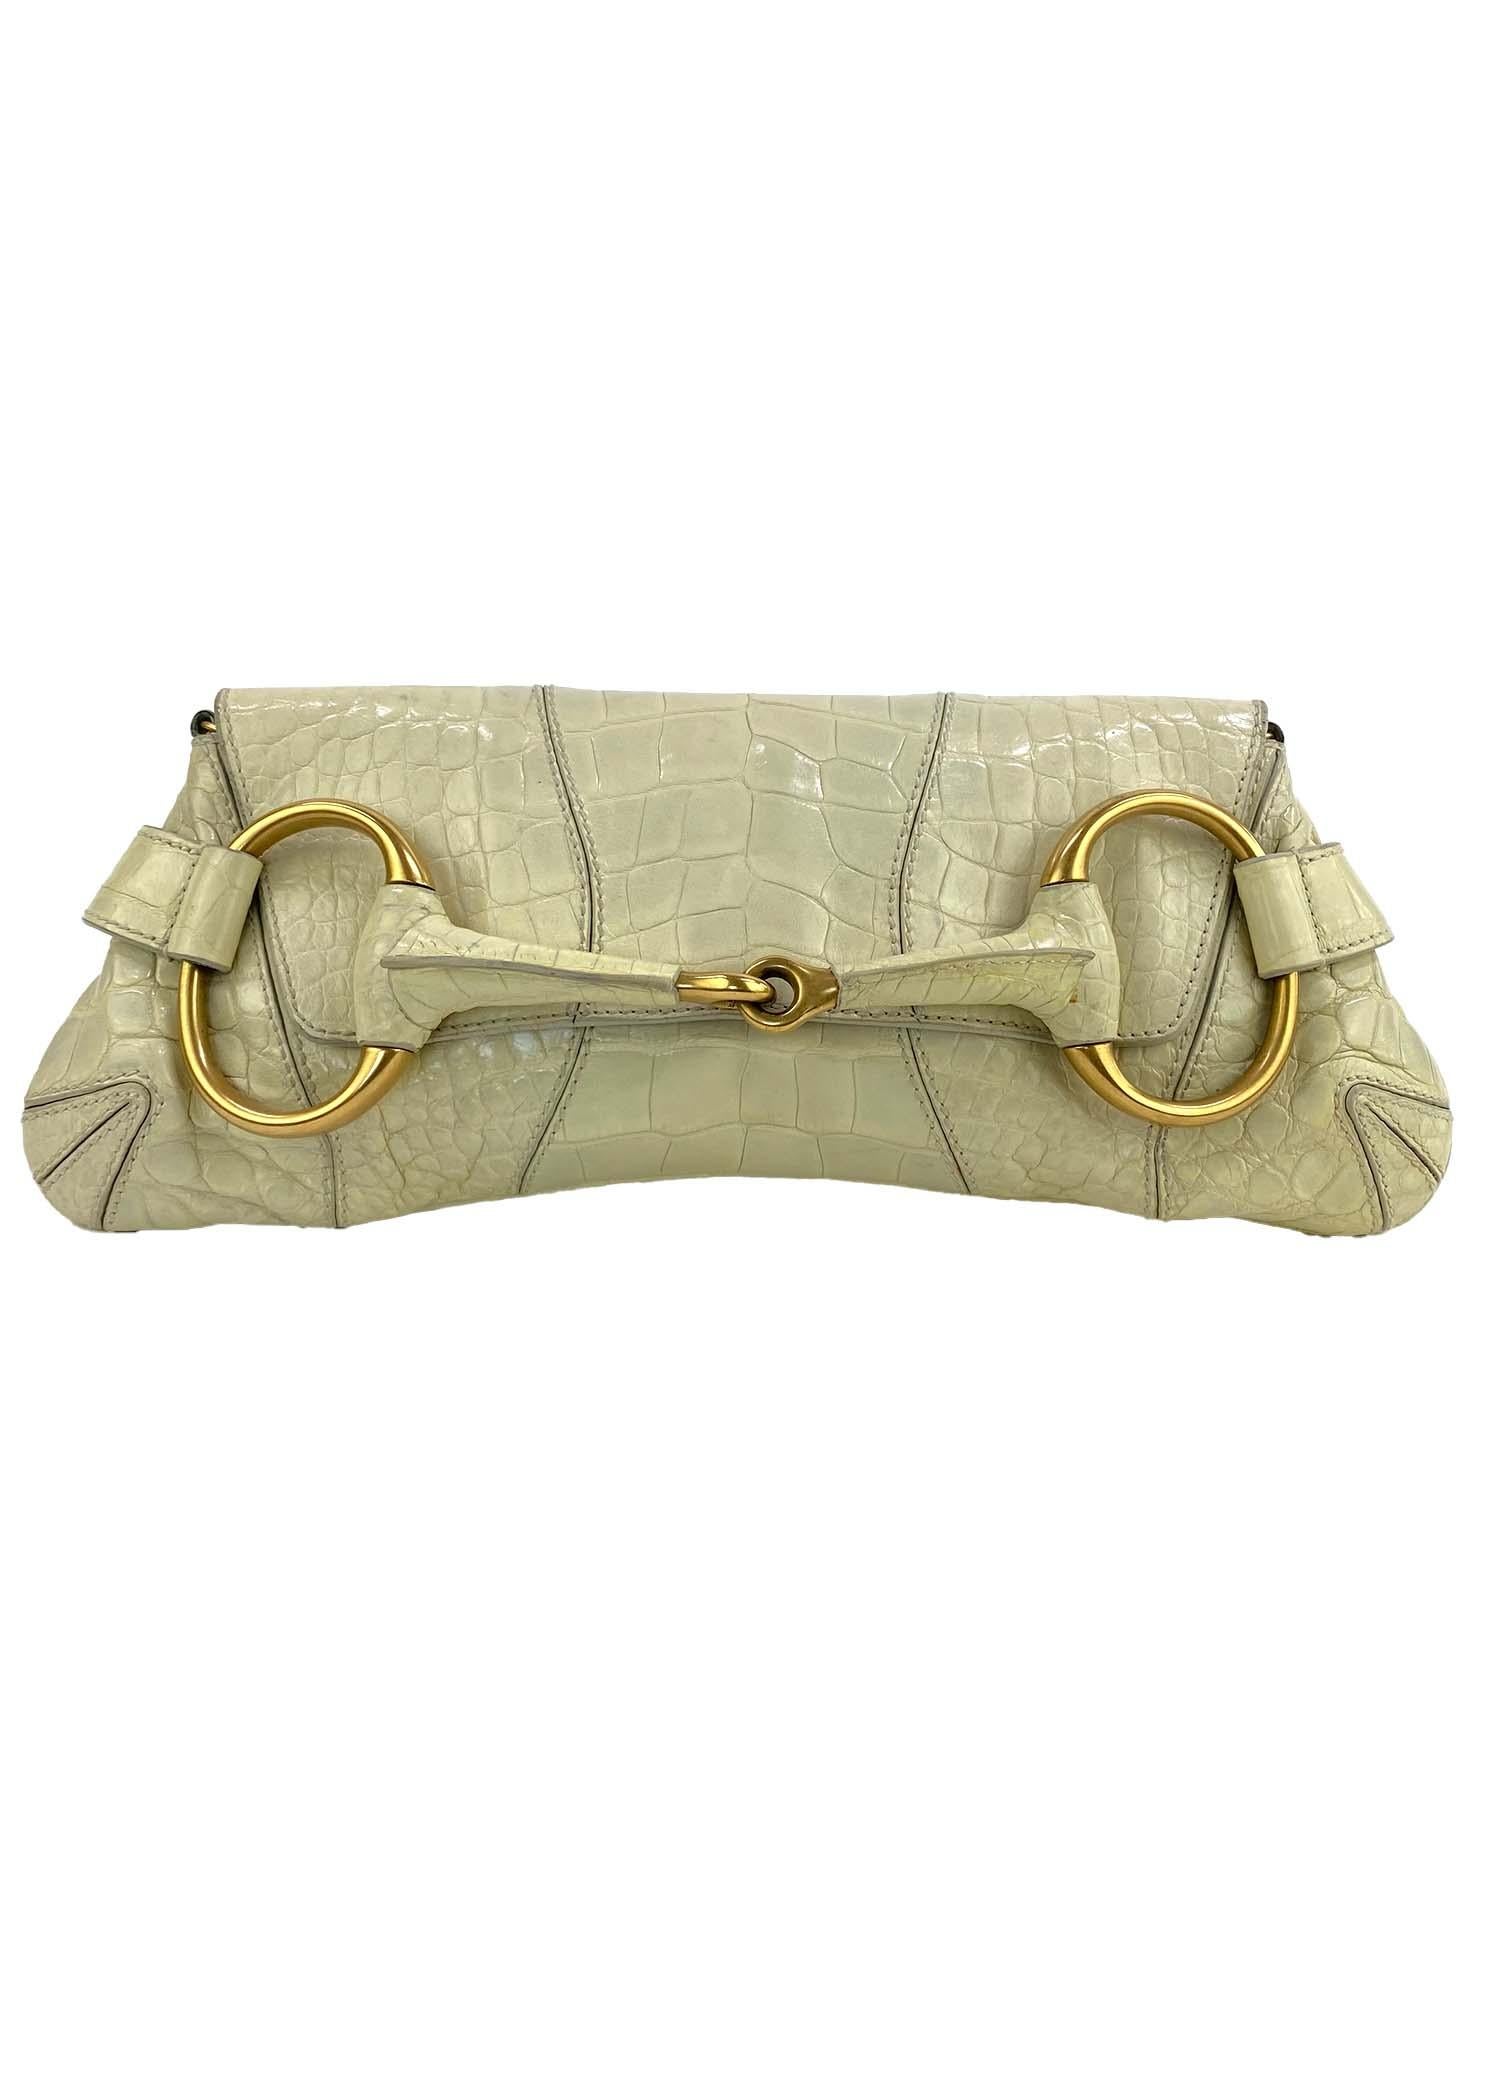 Women's or Men's F/W 2003 Gucci by Tom Ford Creme Crocodile Large Horsebit Convertible Clutch